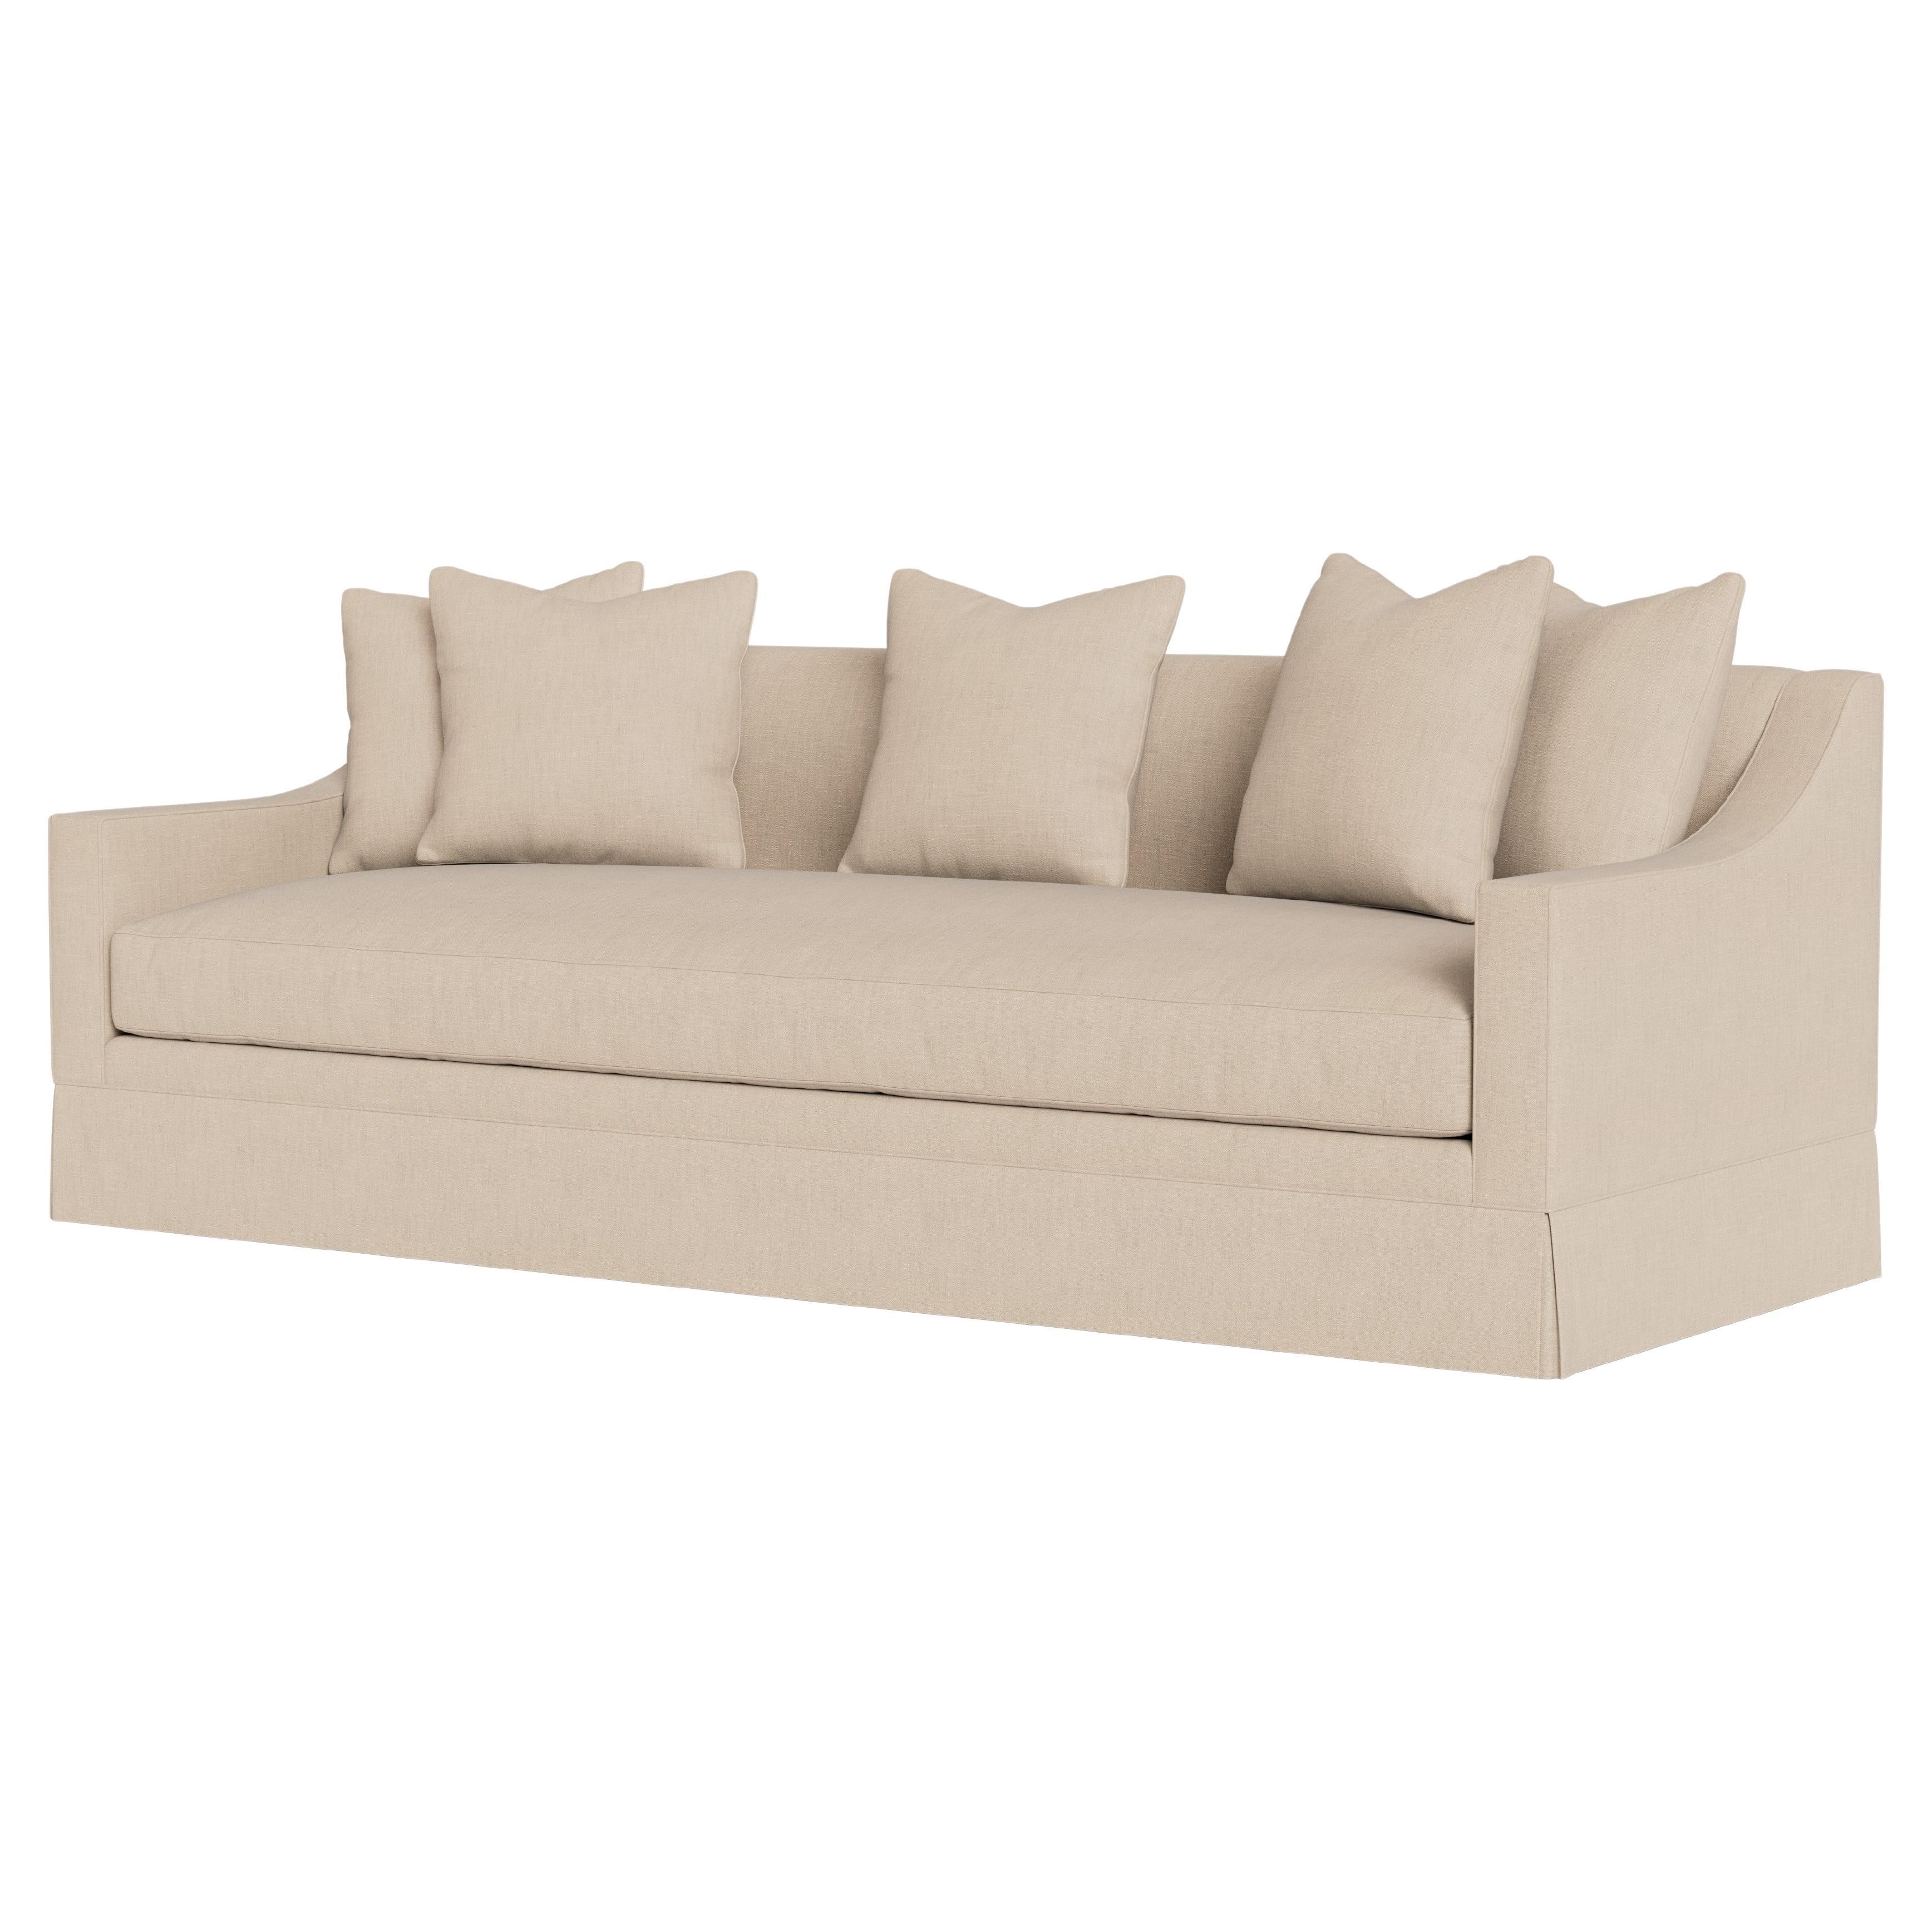 Bunny Williams Home Grant Sofa 96", Solid Performance Linen/Sand For Sale